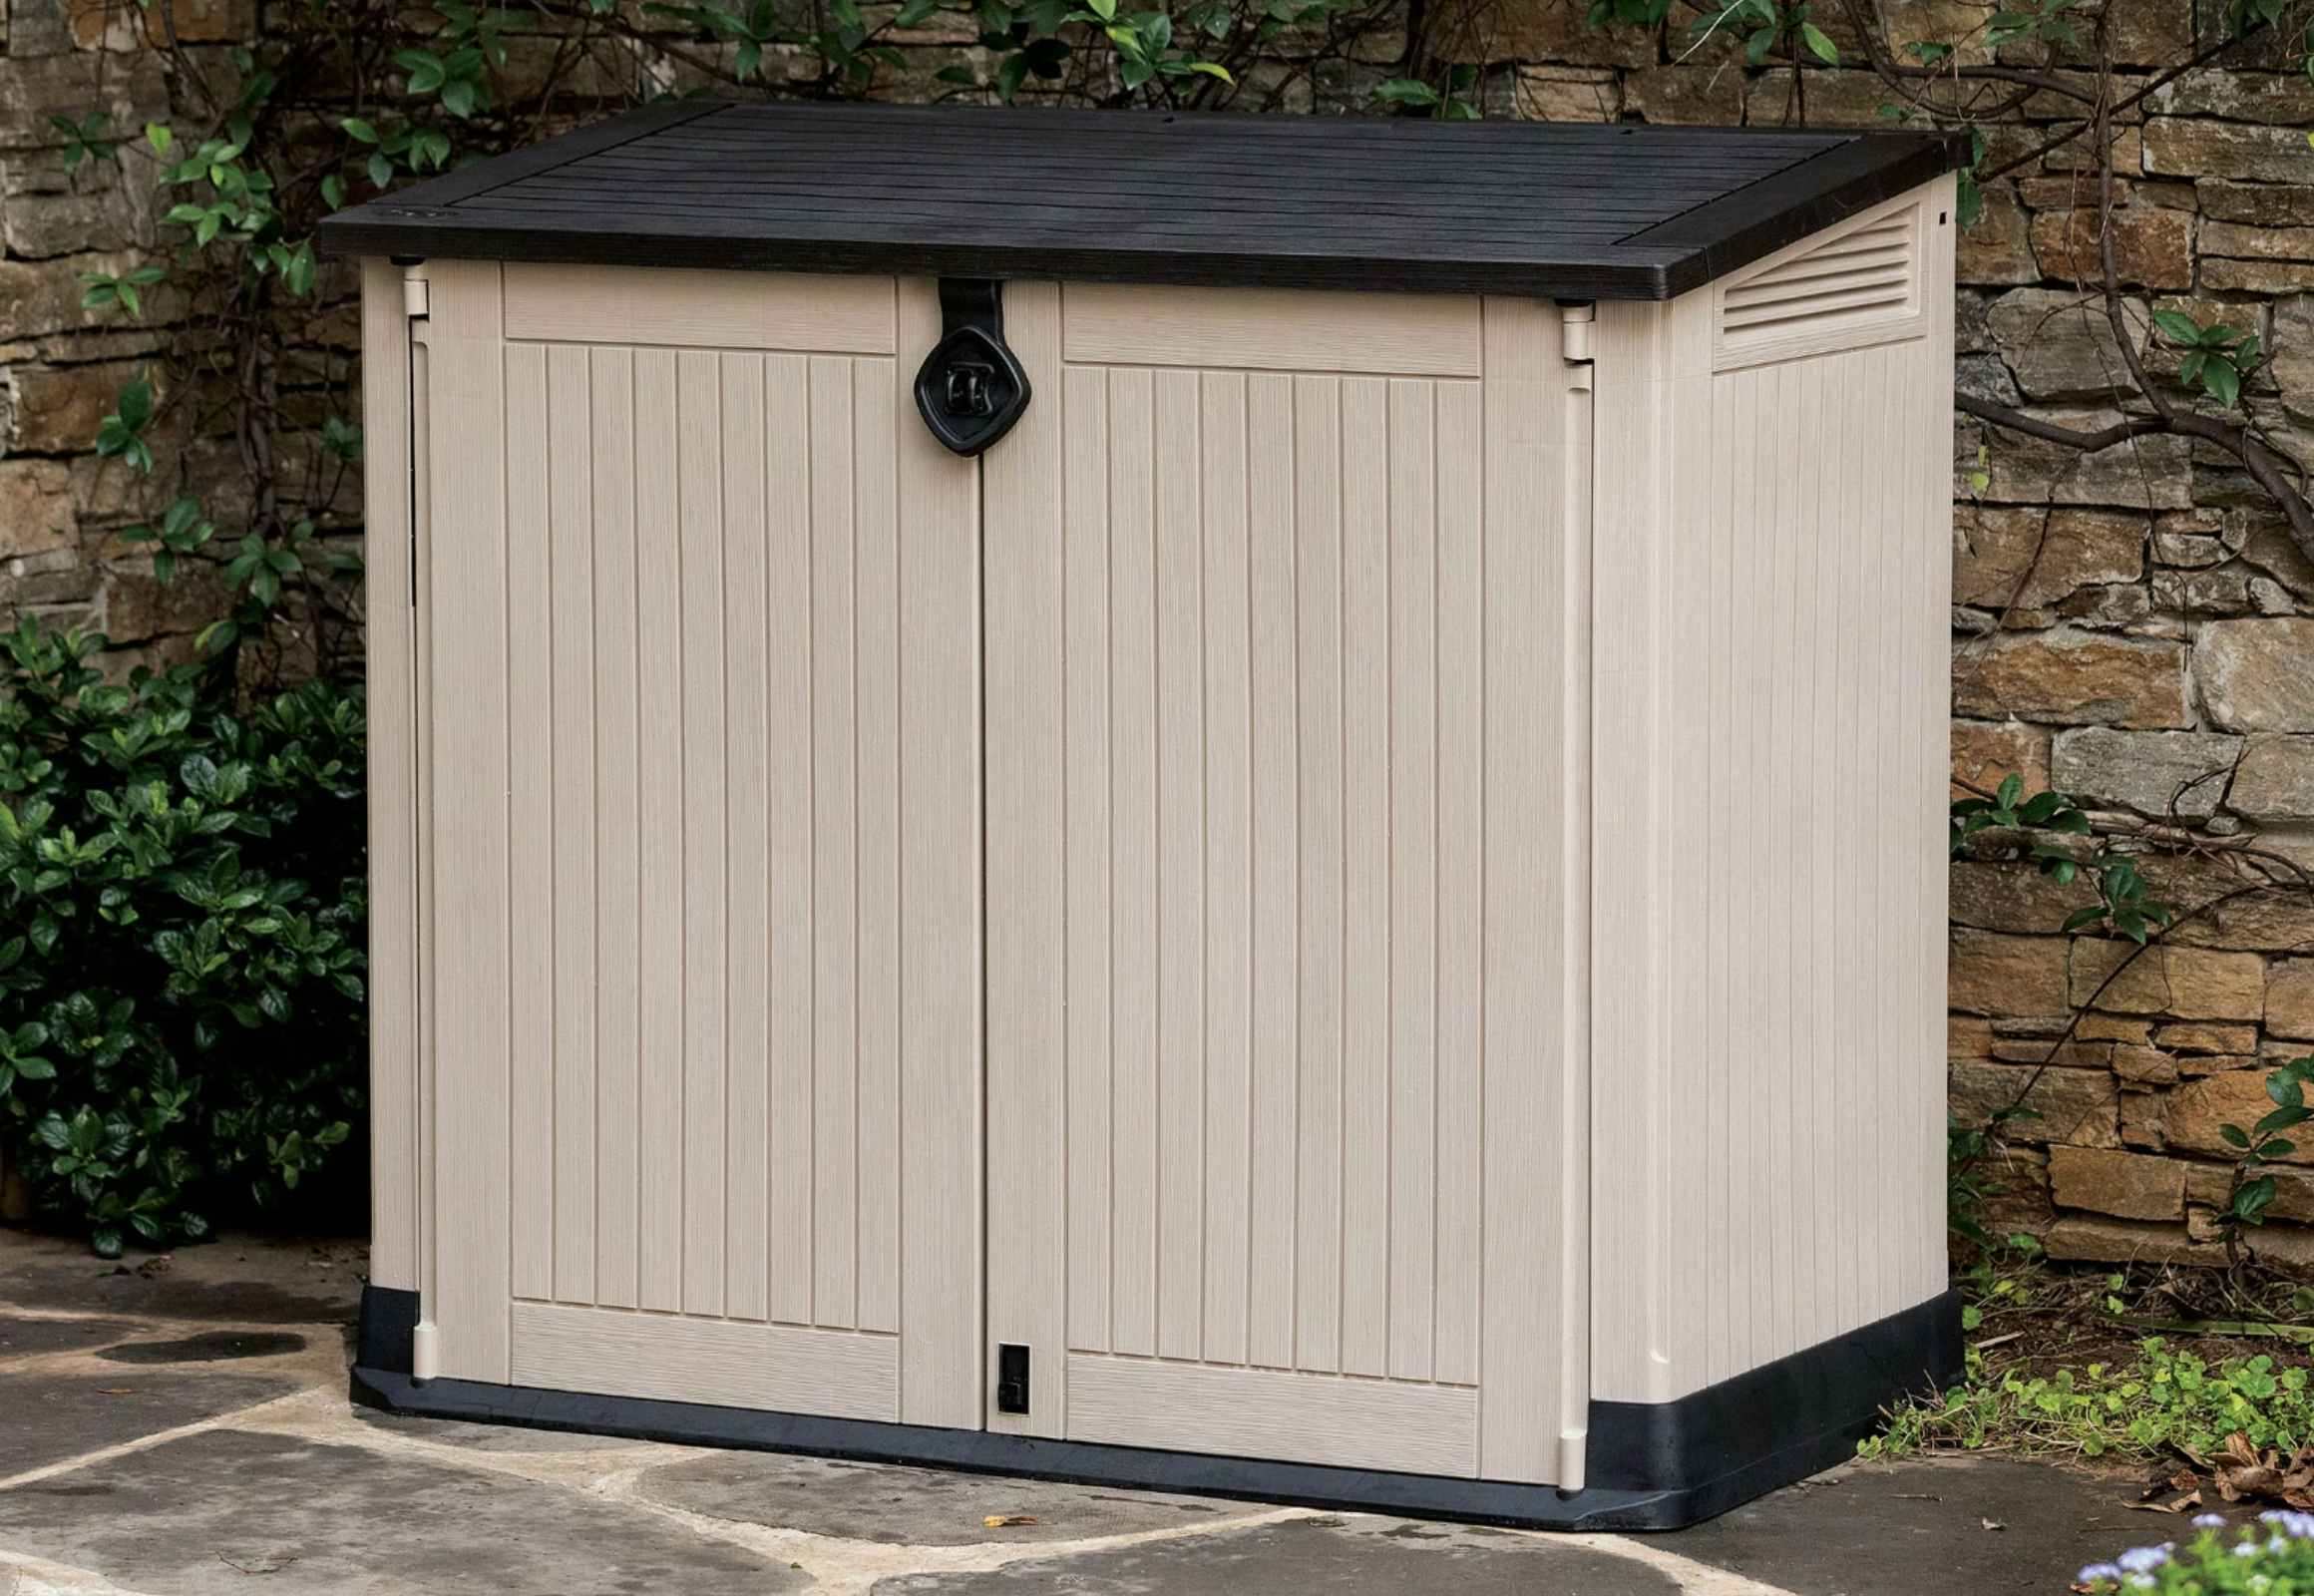 Don't Miss Out: Keter Storage Shed, Now Only $149 at Walmart